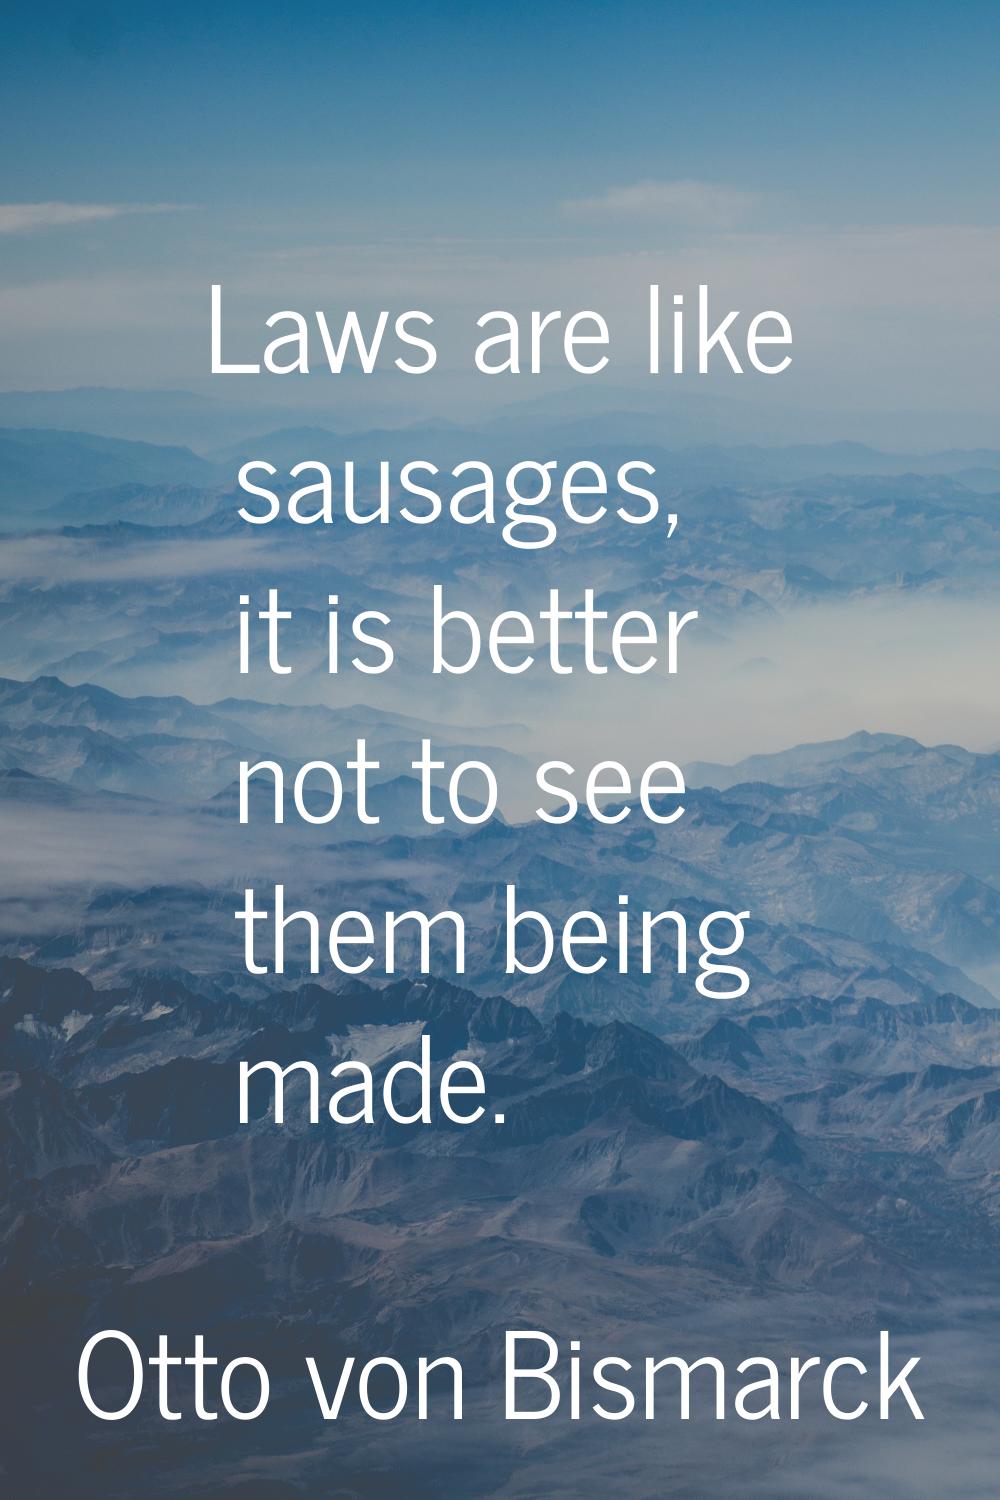 Laws are like sausages, it is better not to see them being made.